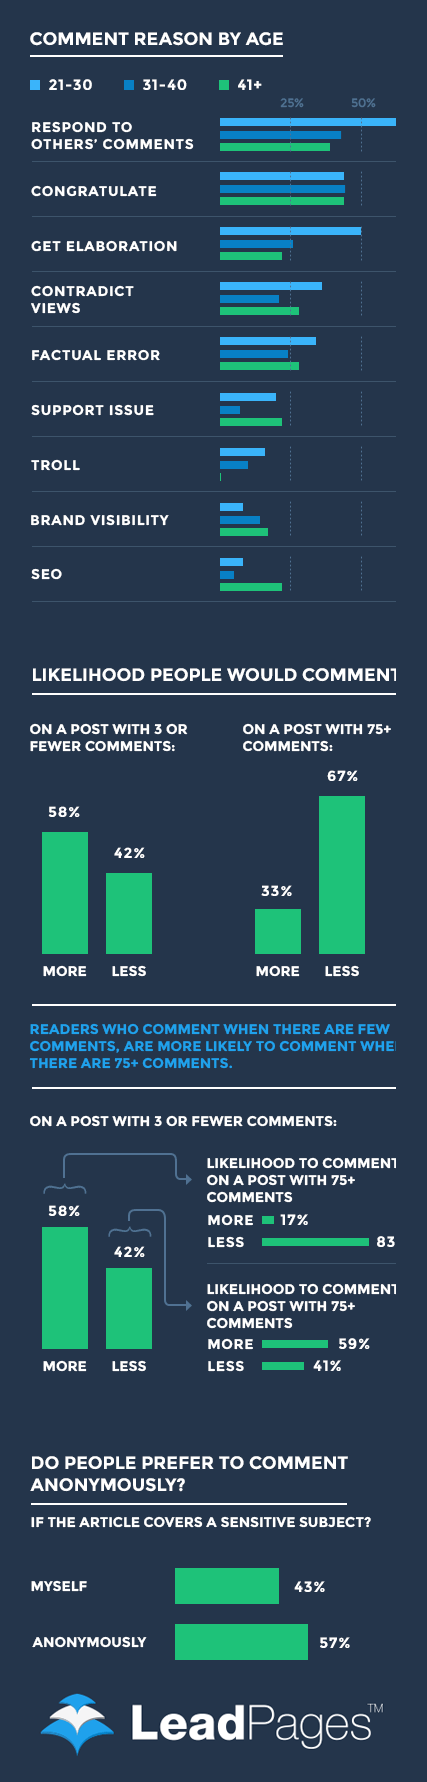 blog-comments-infographic